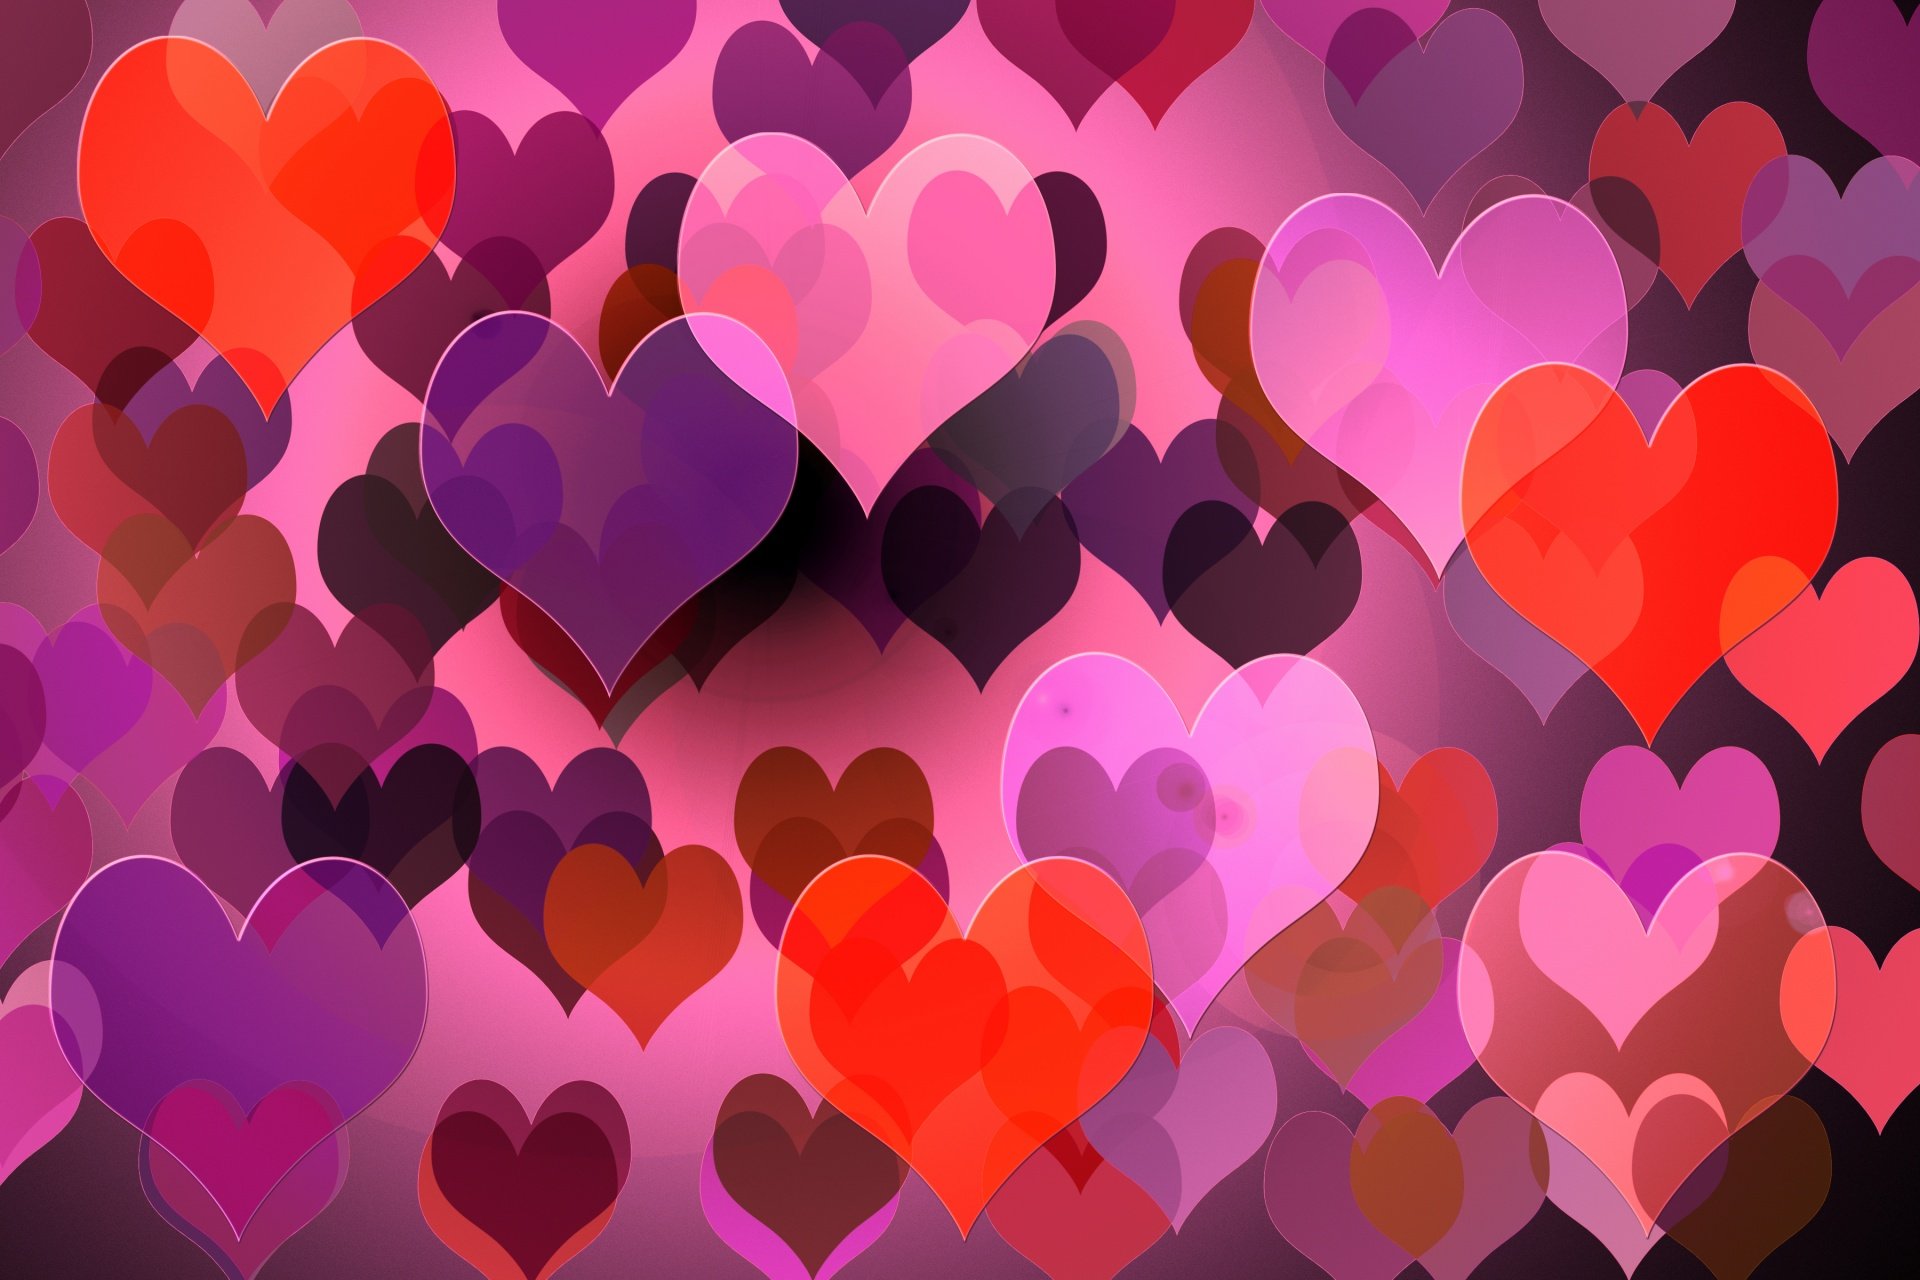 Download free photo of Heart, background, red, pink, purple